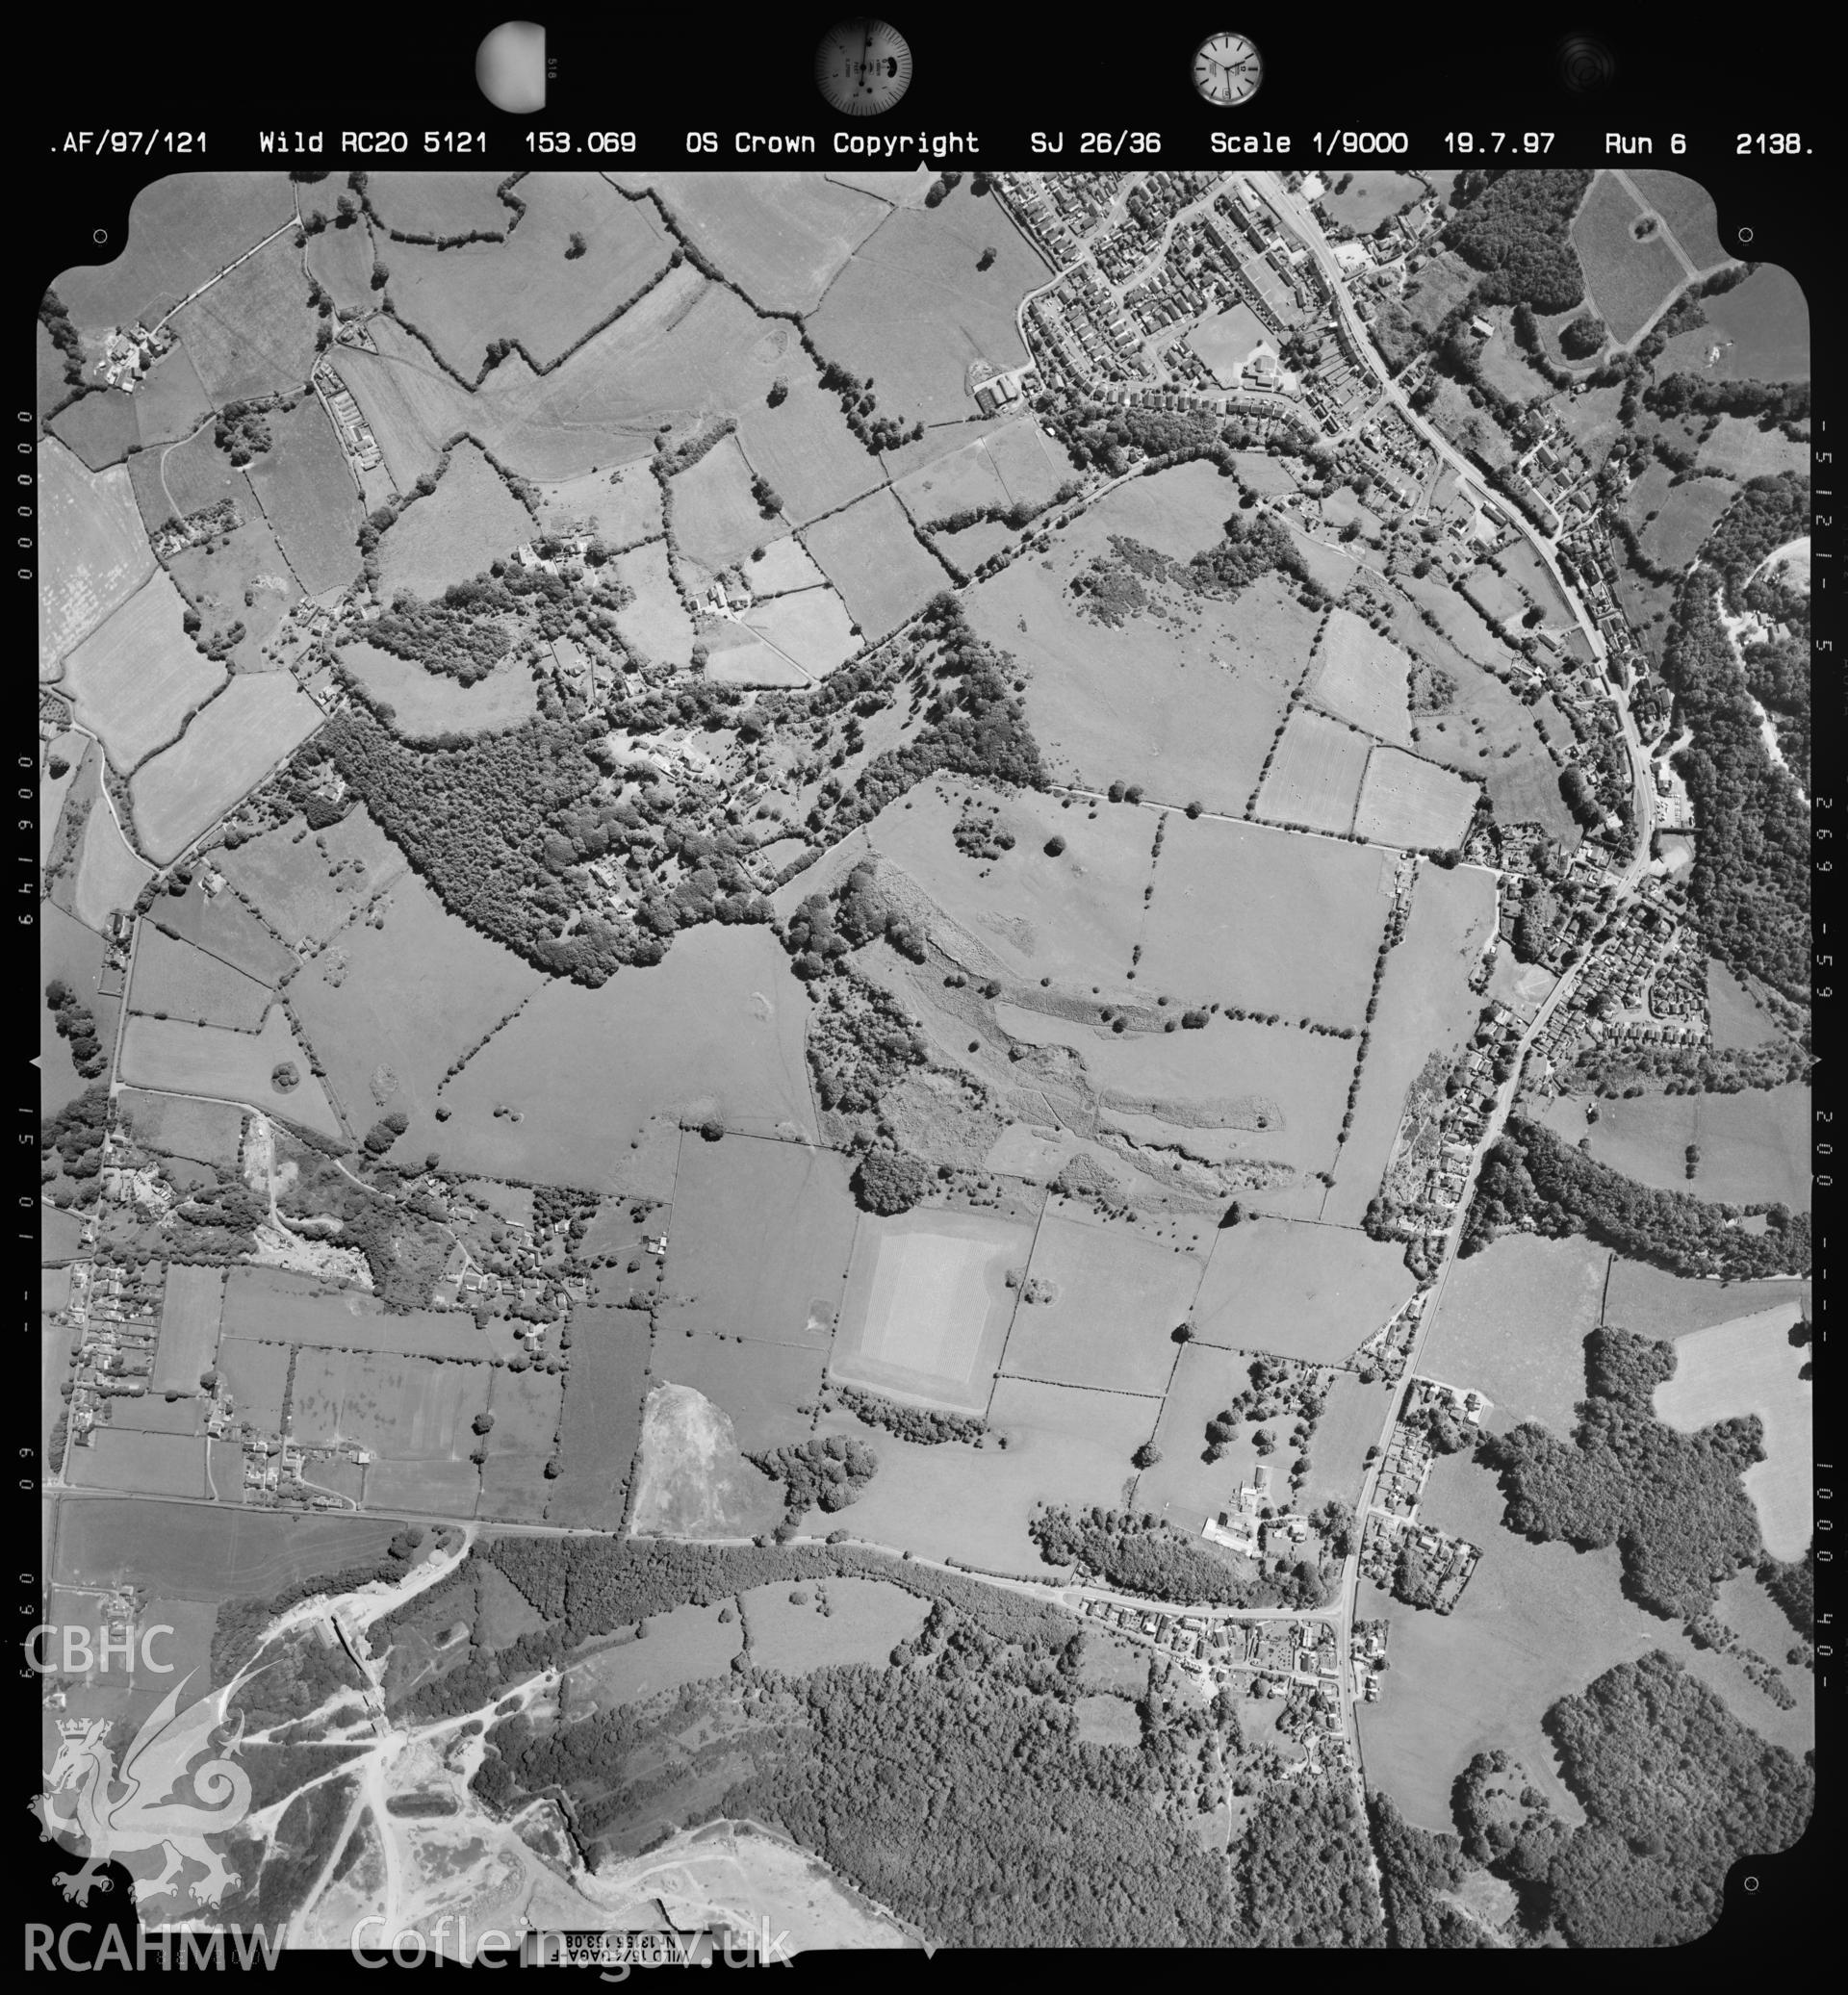 Digitized copy of an aerial photograph showing the Cadole area, taken by Ordnance Survey, July 1997.